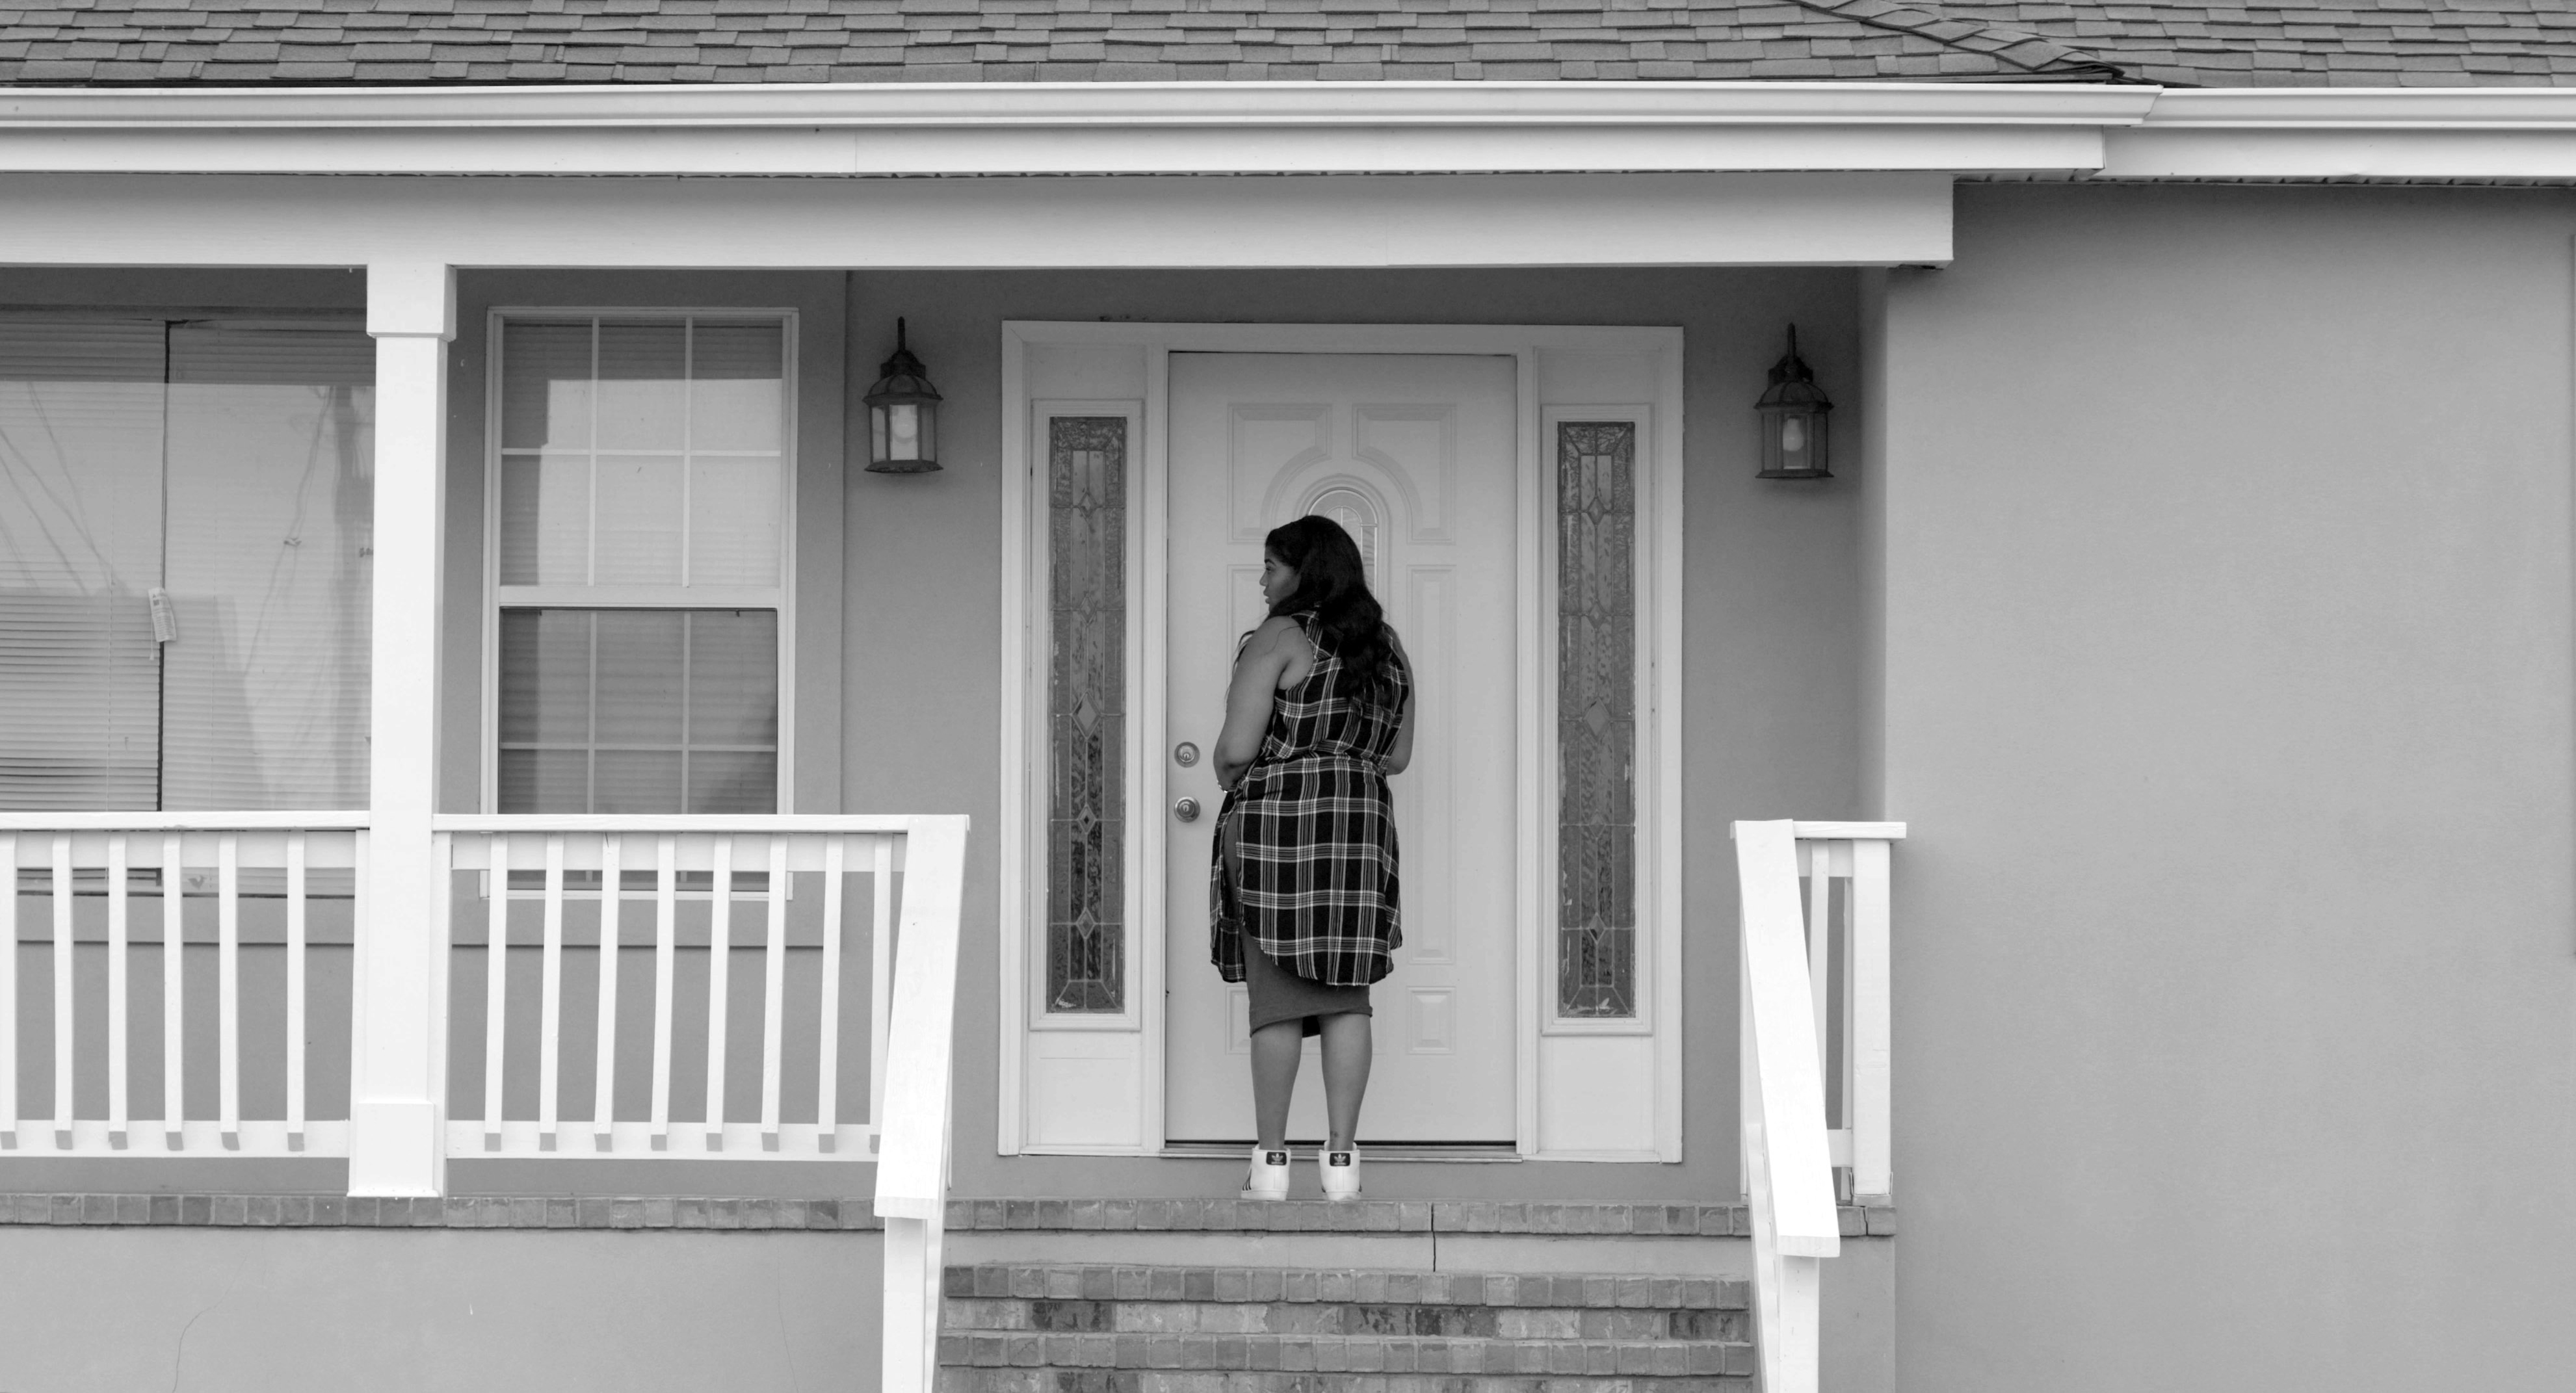 A still from Garrett Bradley's video "Alone" which shows a front porch with a female figure standing at a front door. The entire scene is in grey-scale. 